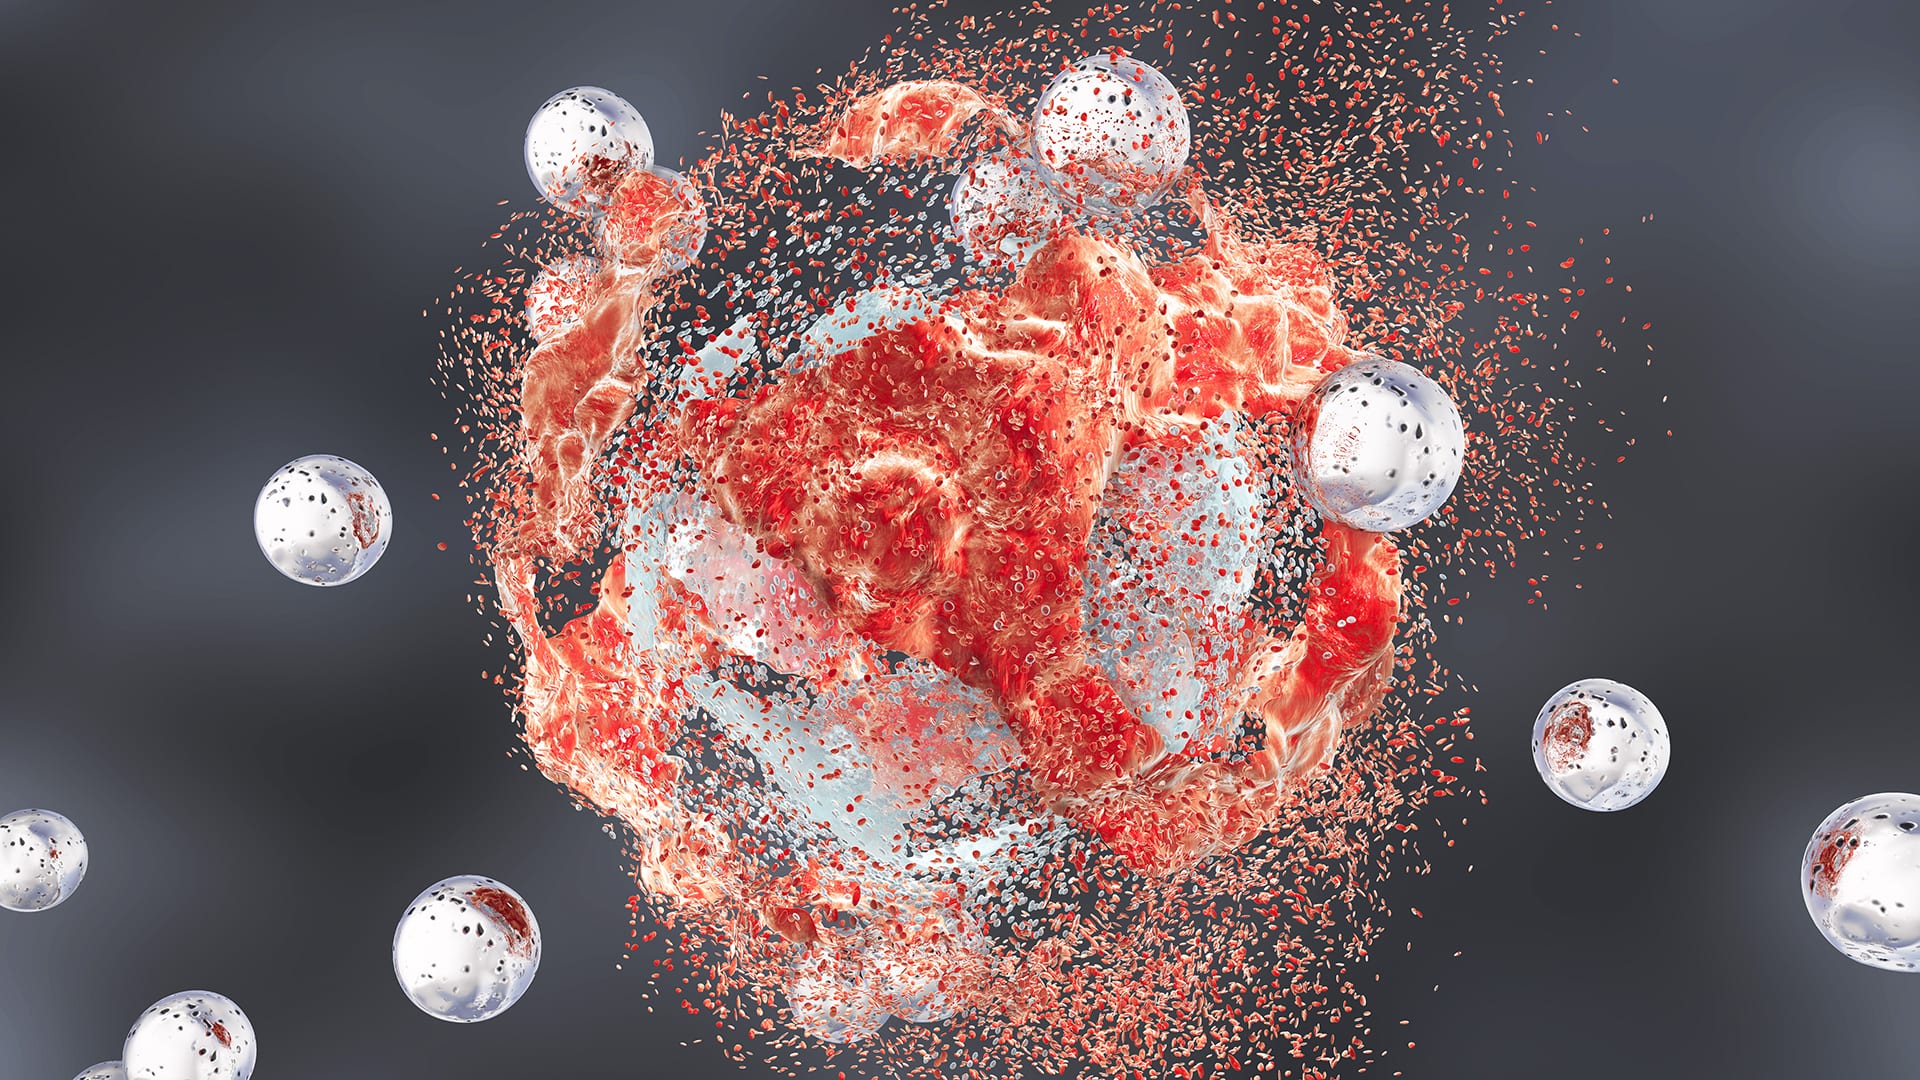 Did you know that nanoparticle therapy can target lymph node metastases?